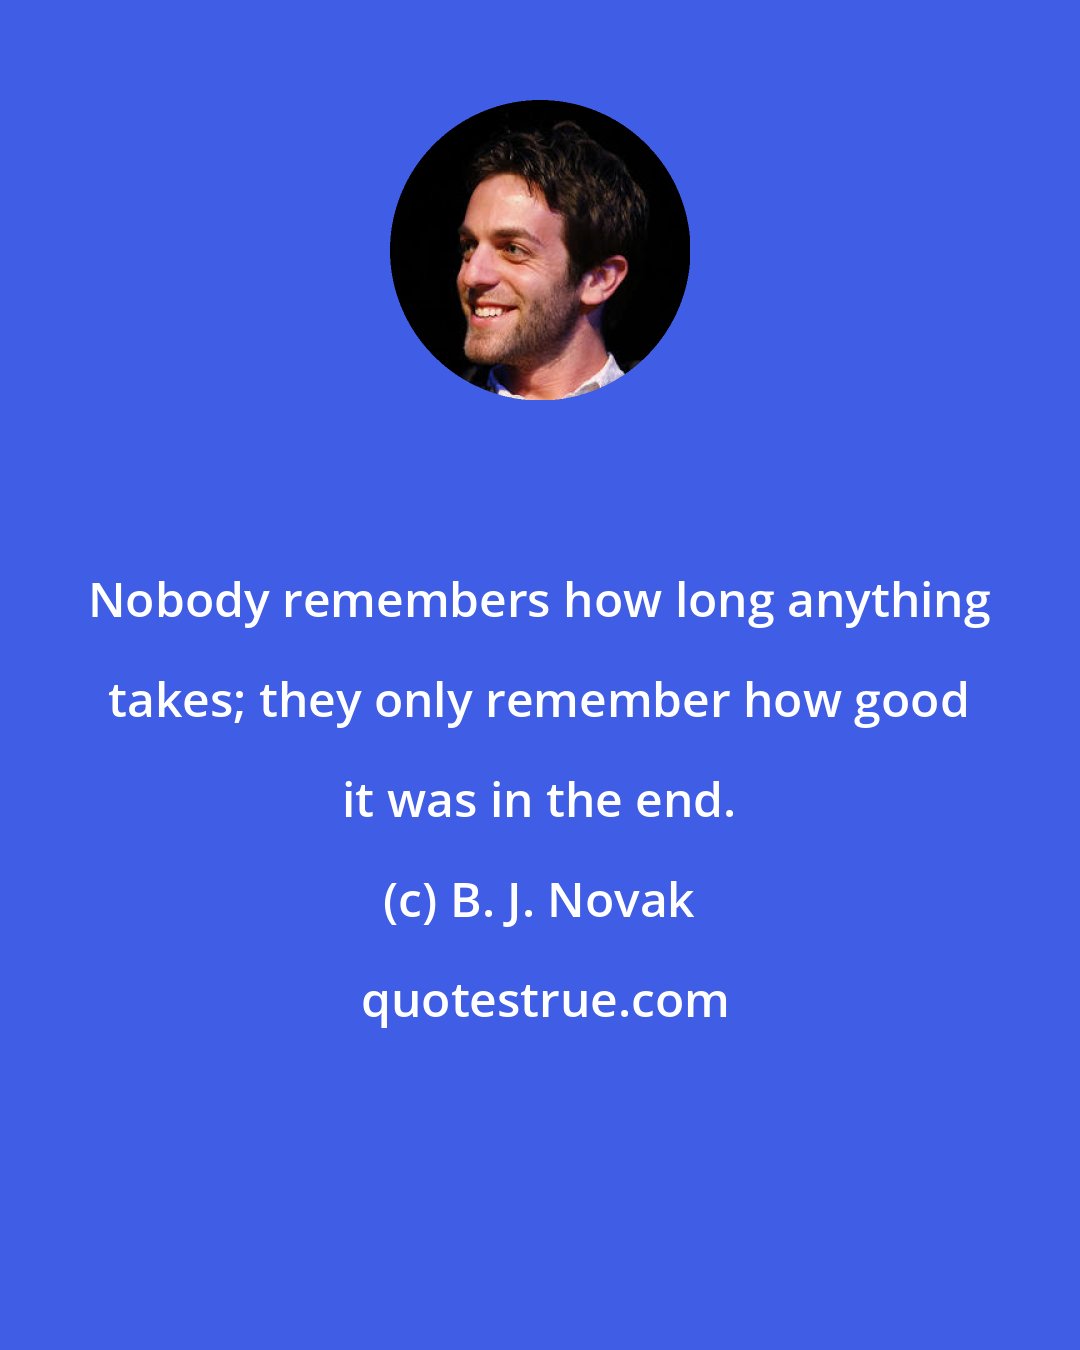 B. J. Novak: Nobody remembers how long anything takes; they only remember how good it was in the end.